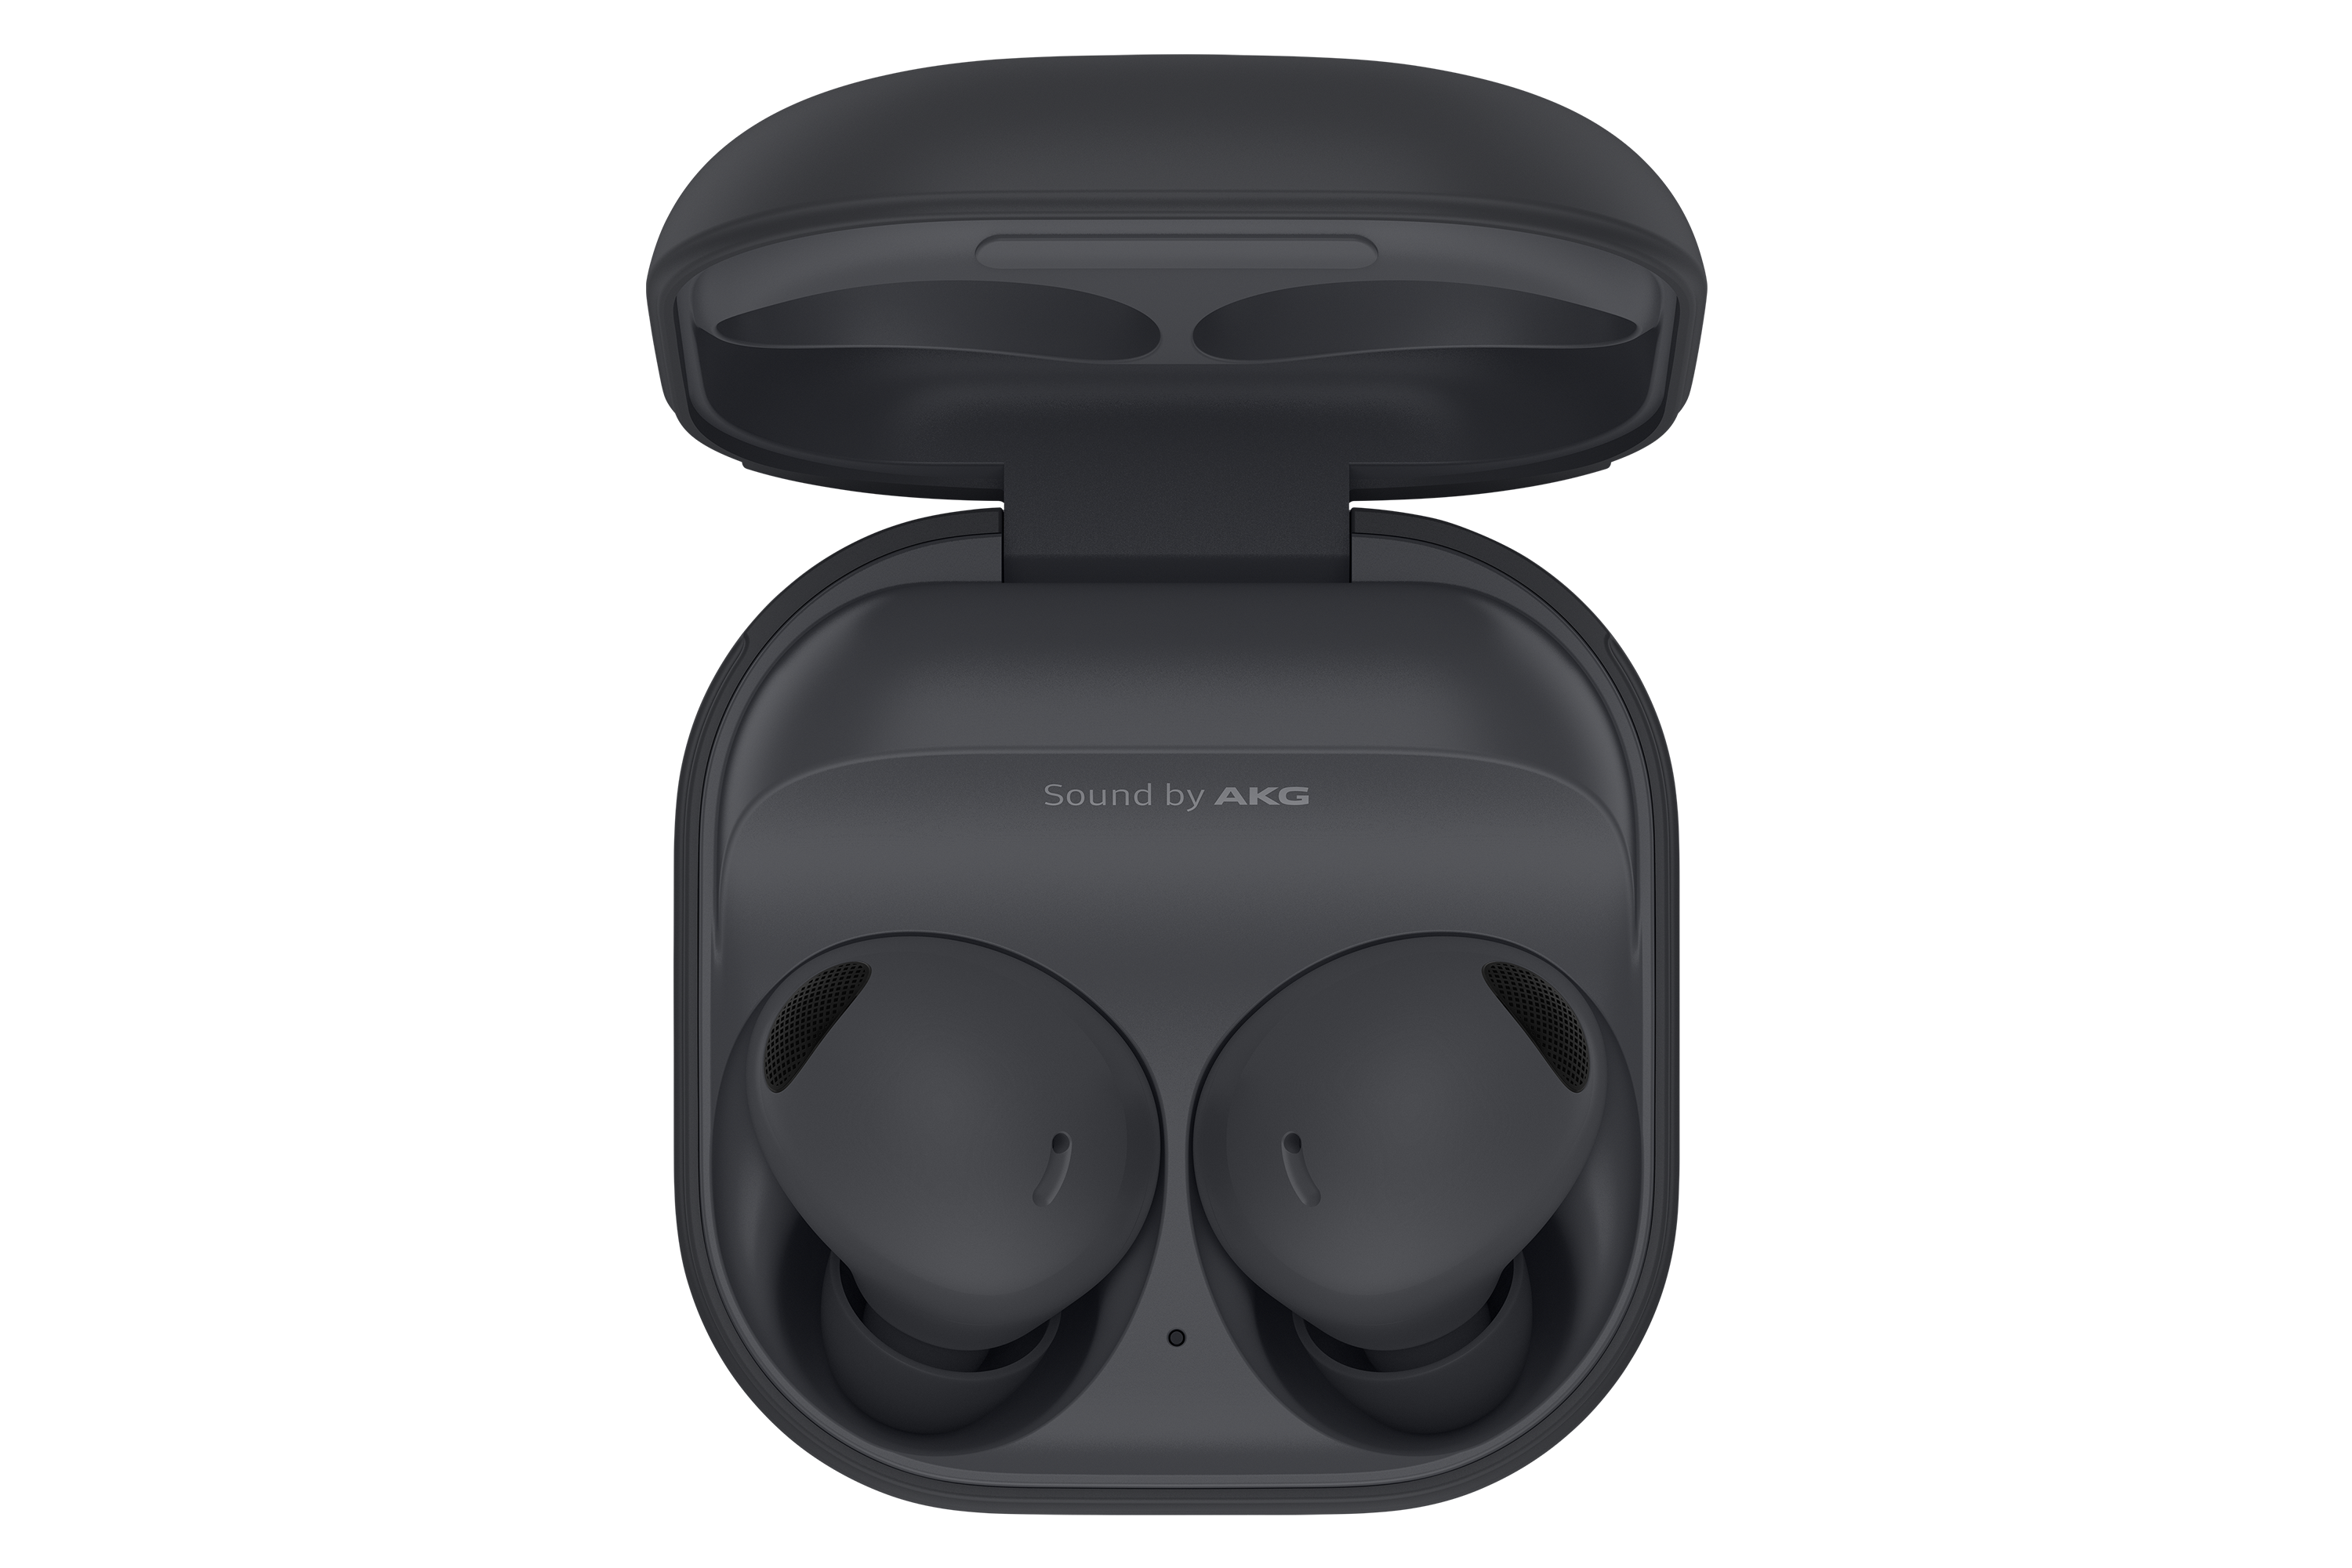 Buy a Galaxy S23 and receive a free pair of Galaxy Buds2 Pro with your purchase.